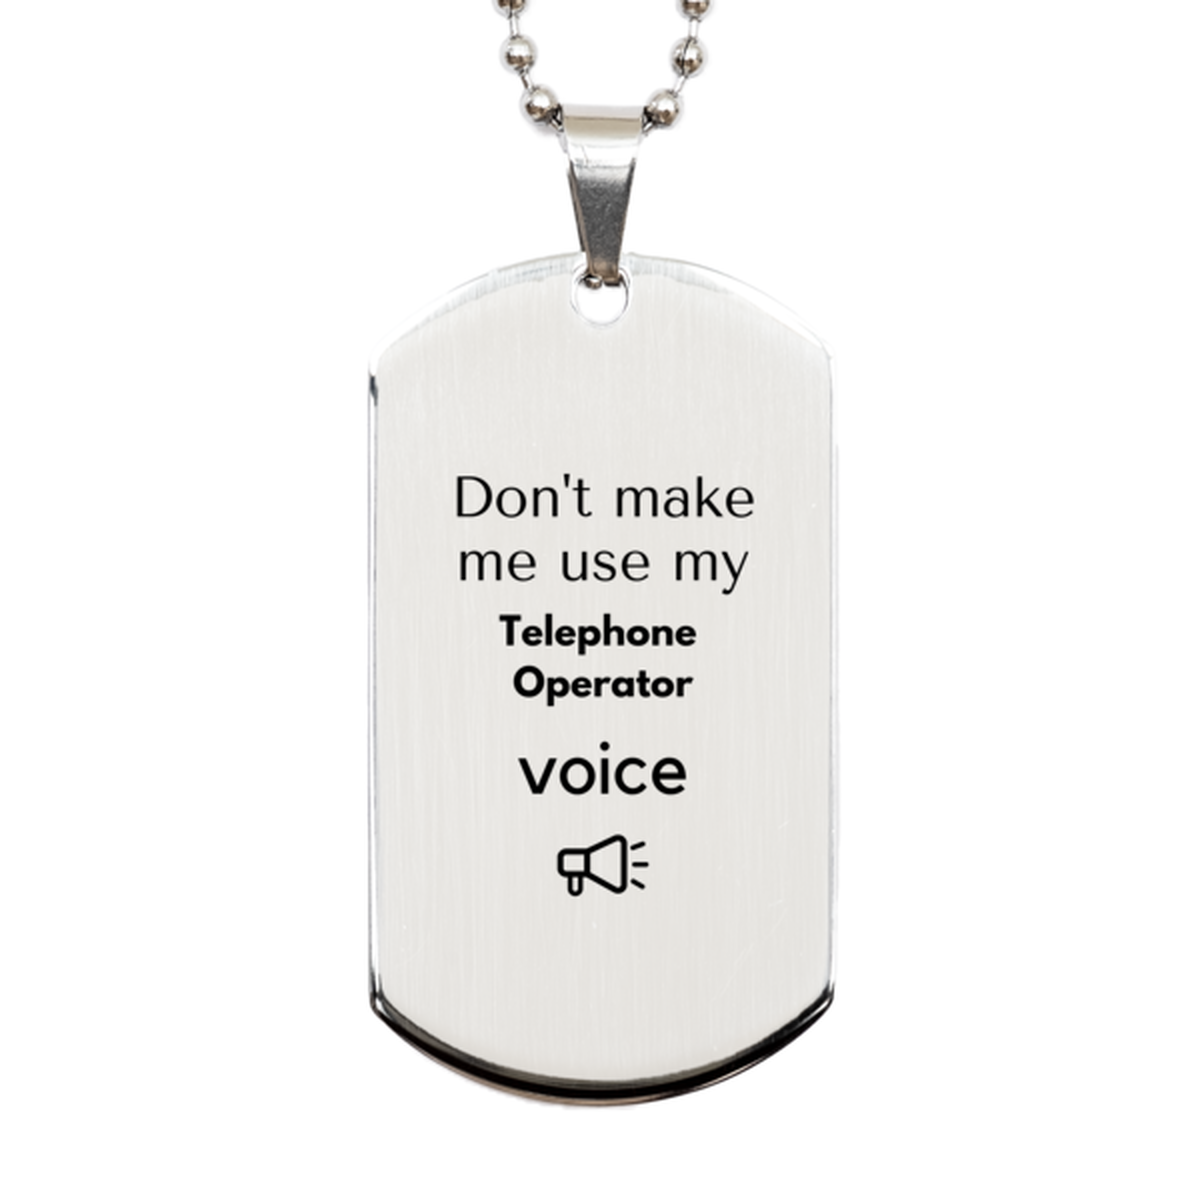 Don't make me use my Telephone Operator voice, Sarcasm Telephone Operator Gifts, Christmas Telephone Operator Silver Dog Tag Birthday Unique Gifts For Telephone Operator Coworkers, Men, Women, Colleague, Friends